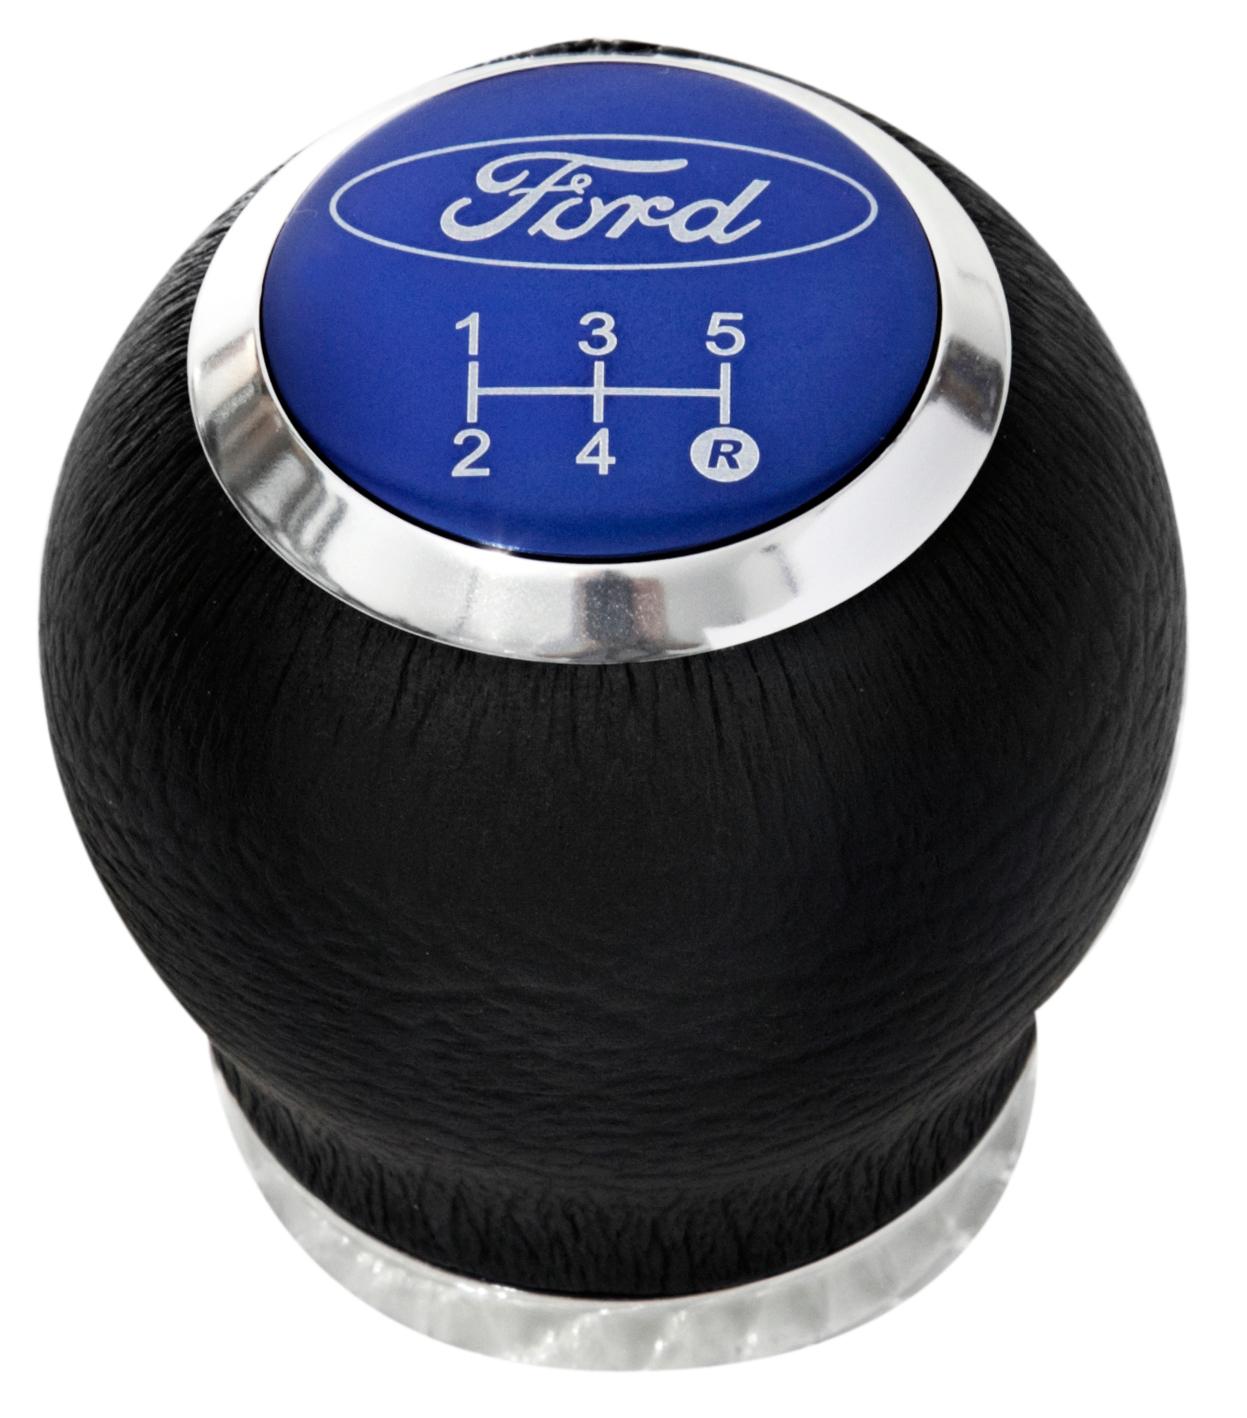 Richbrook Ford Leather Gear Knob (Lift Reverse)